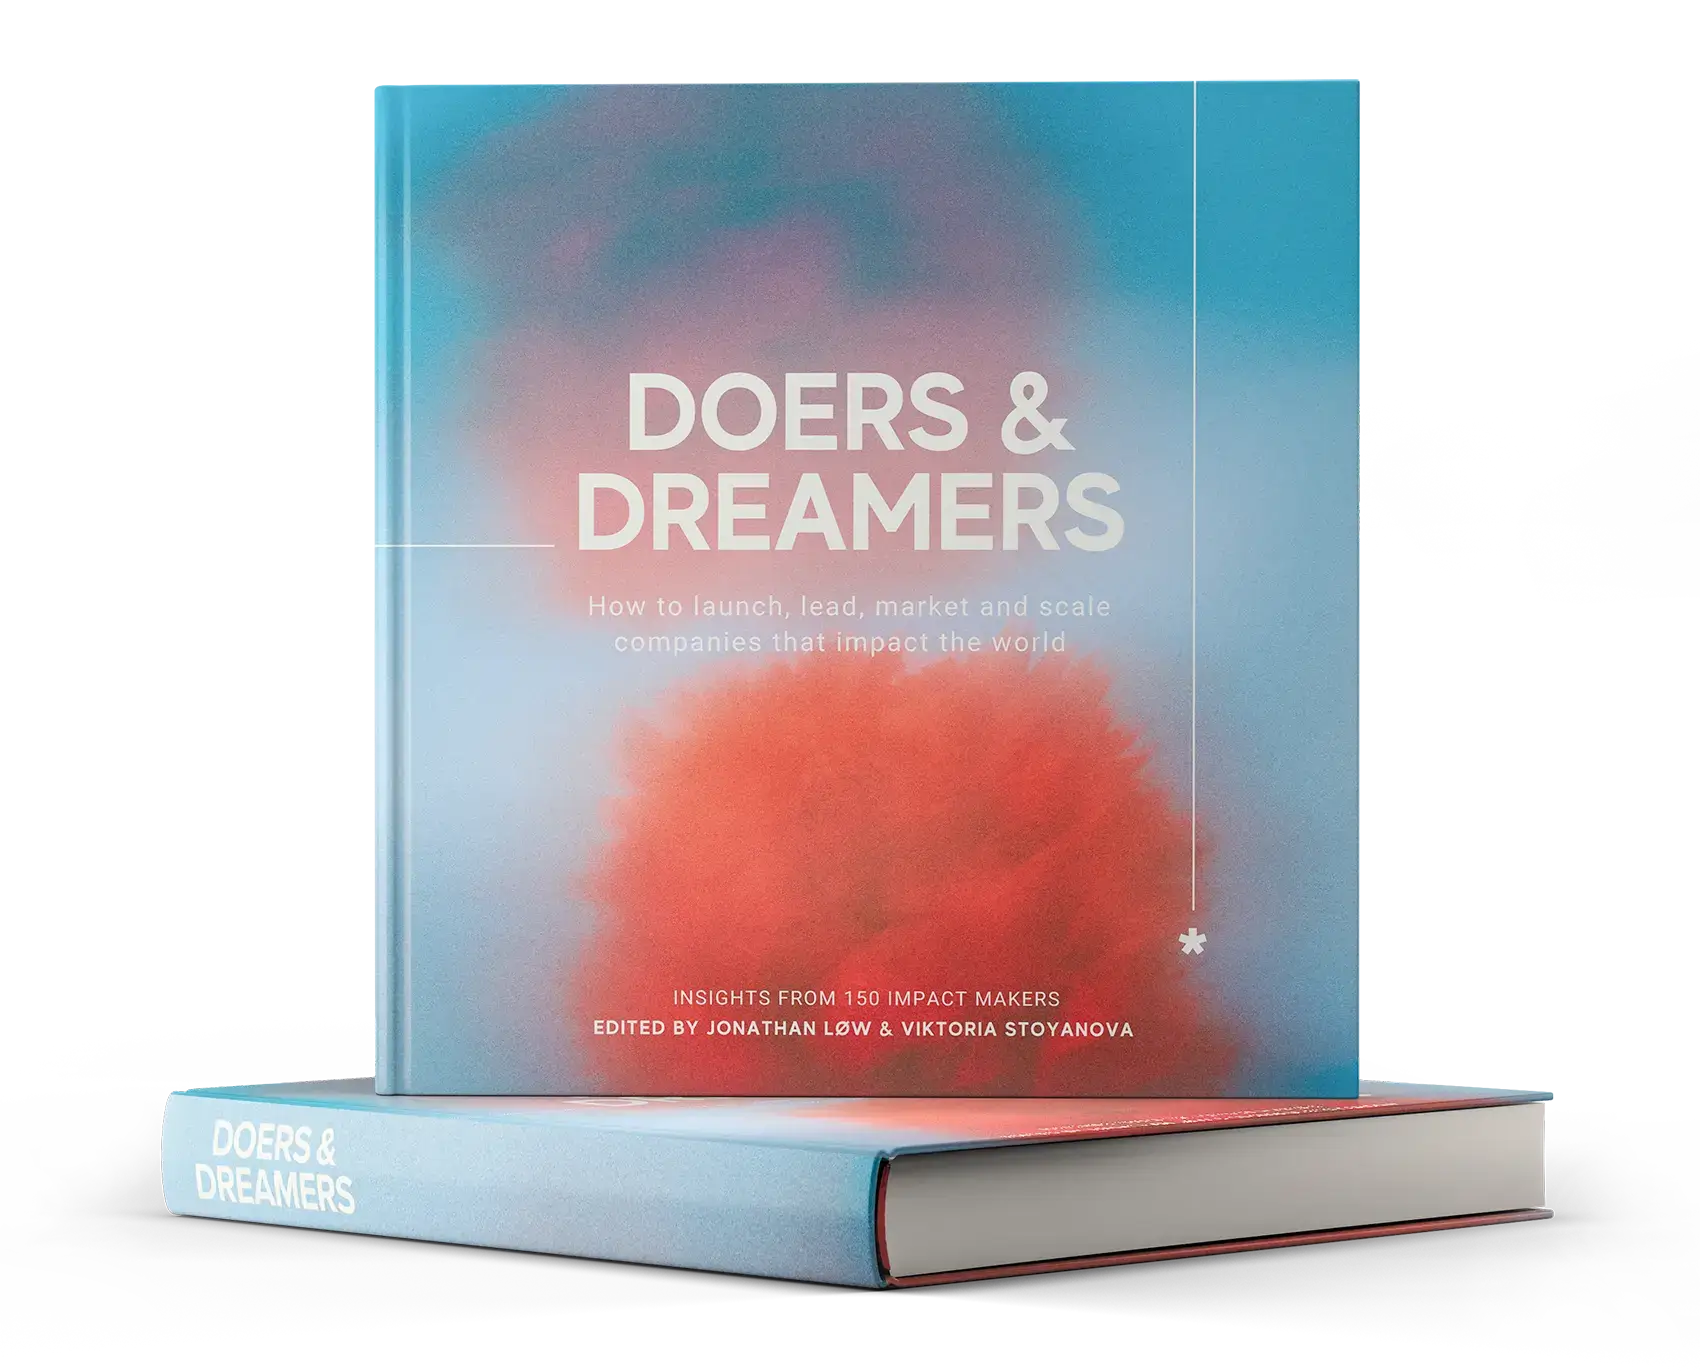 Doers & Dreamers book